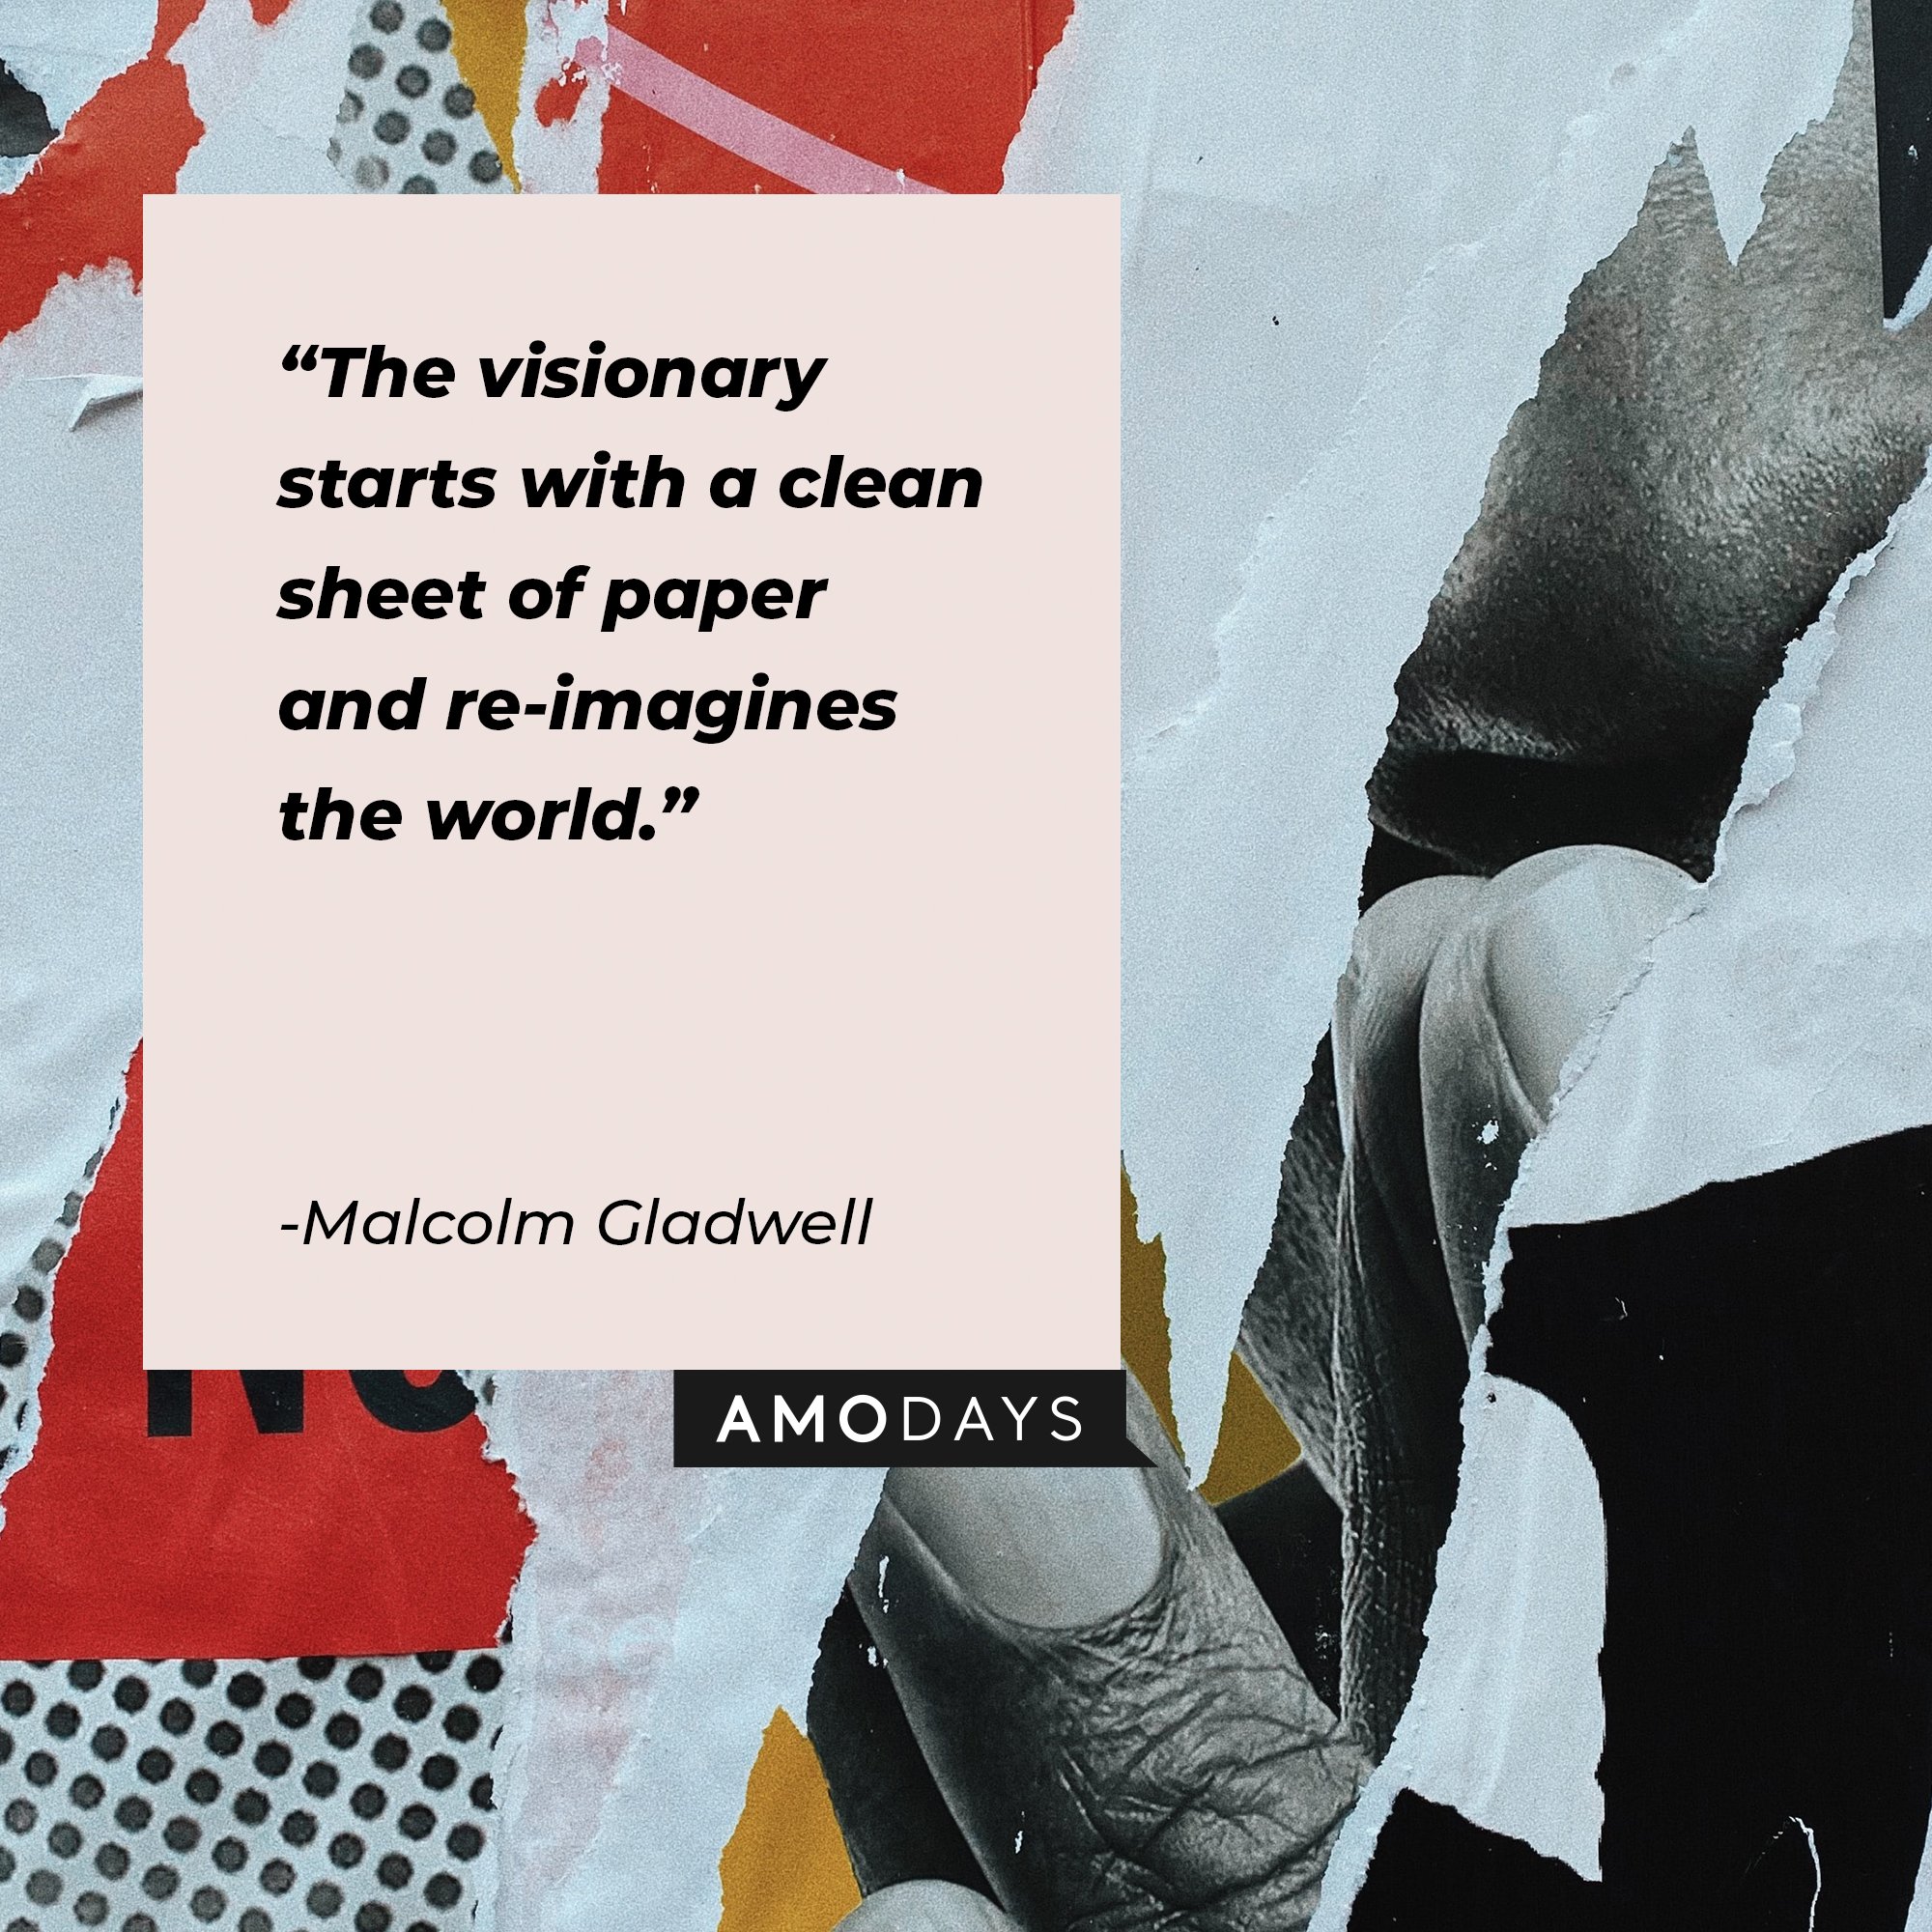  Malcolm Gladwell’s quote: "The visionary starts with a clean sheet of paper and re-imagines the world." | Image: AmoDays